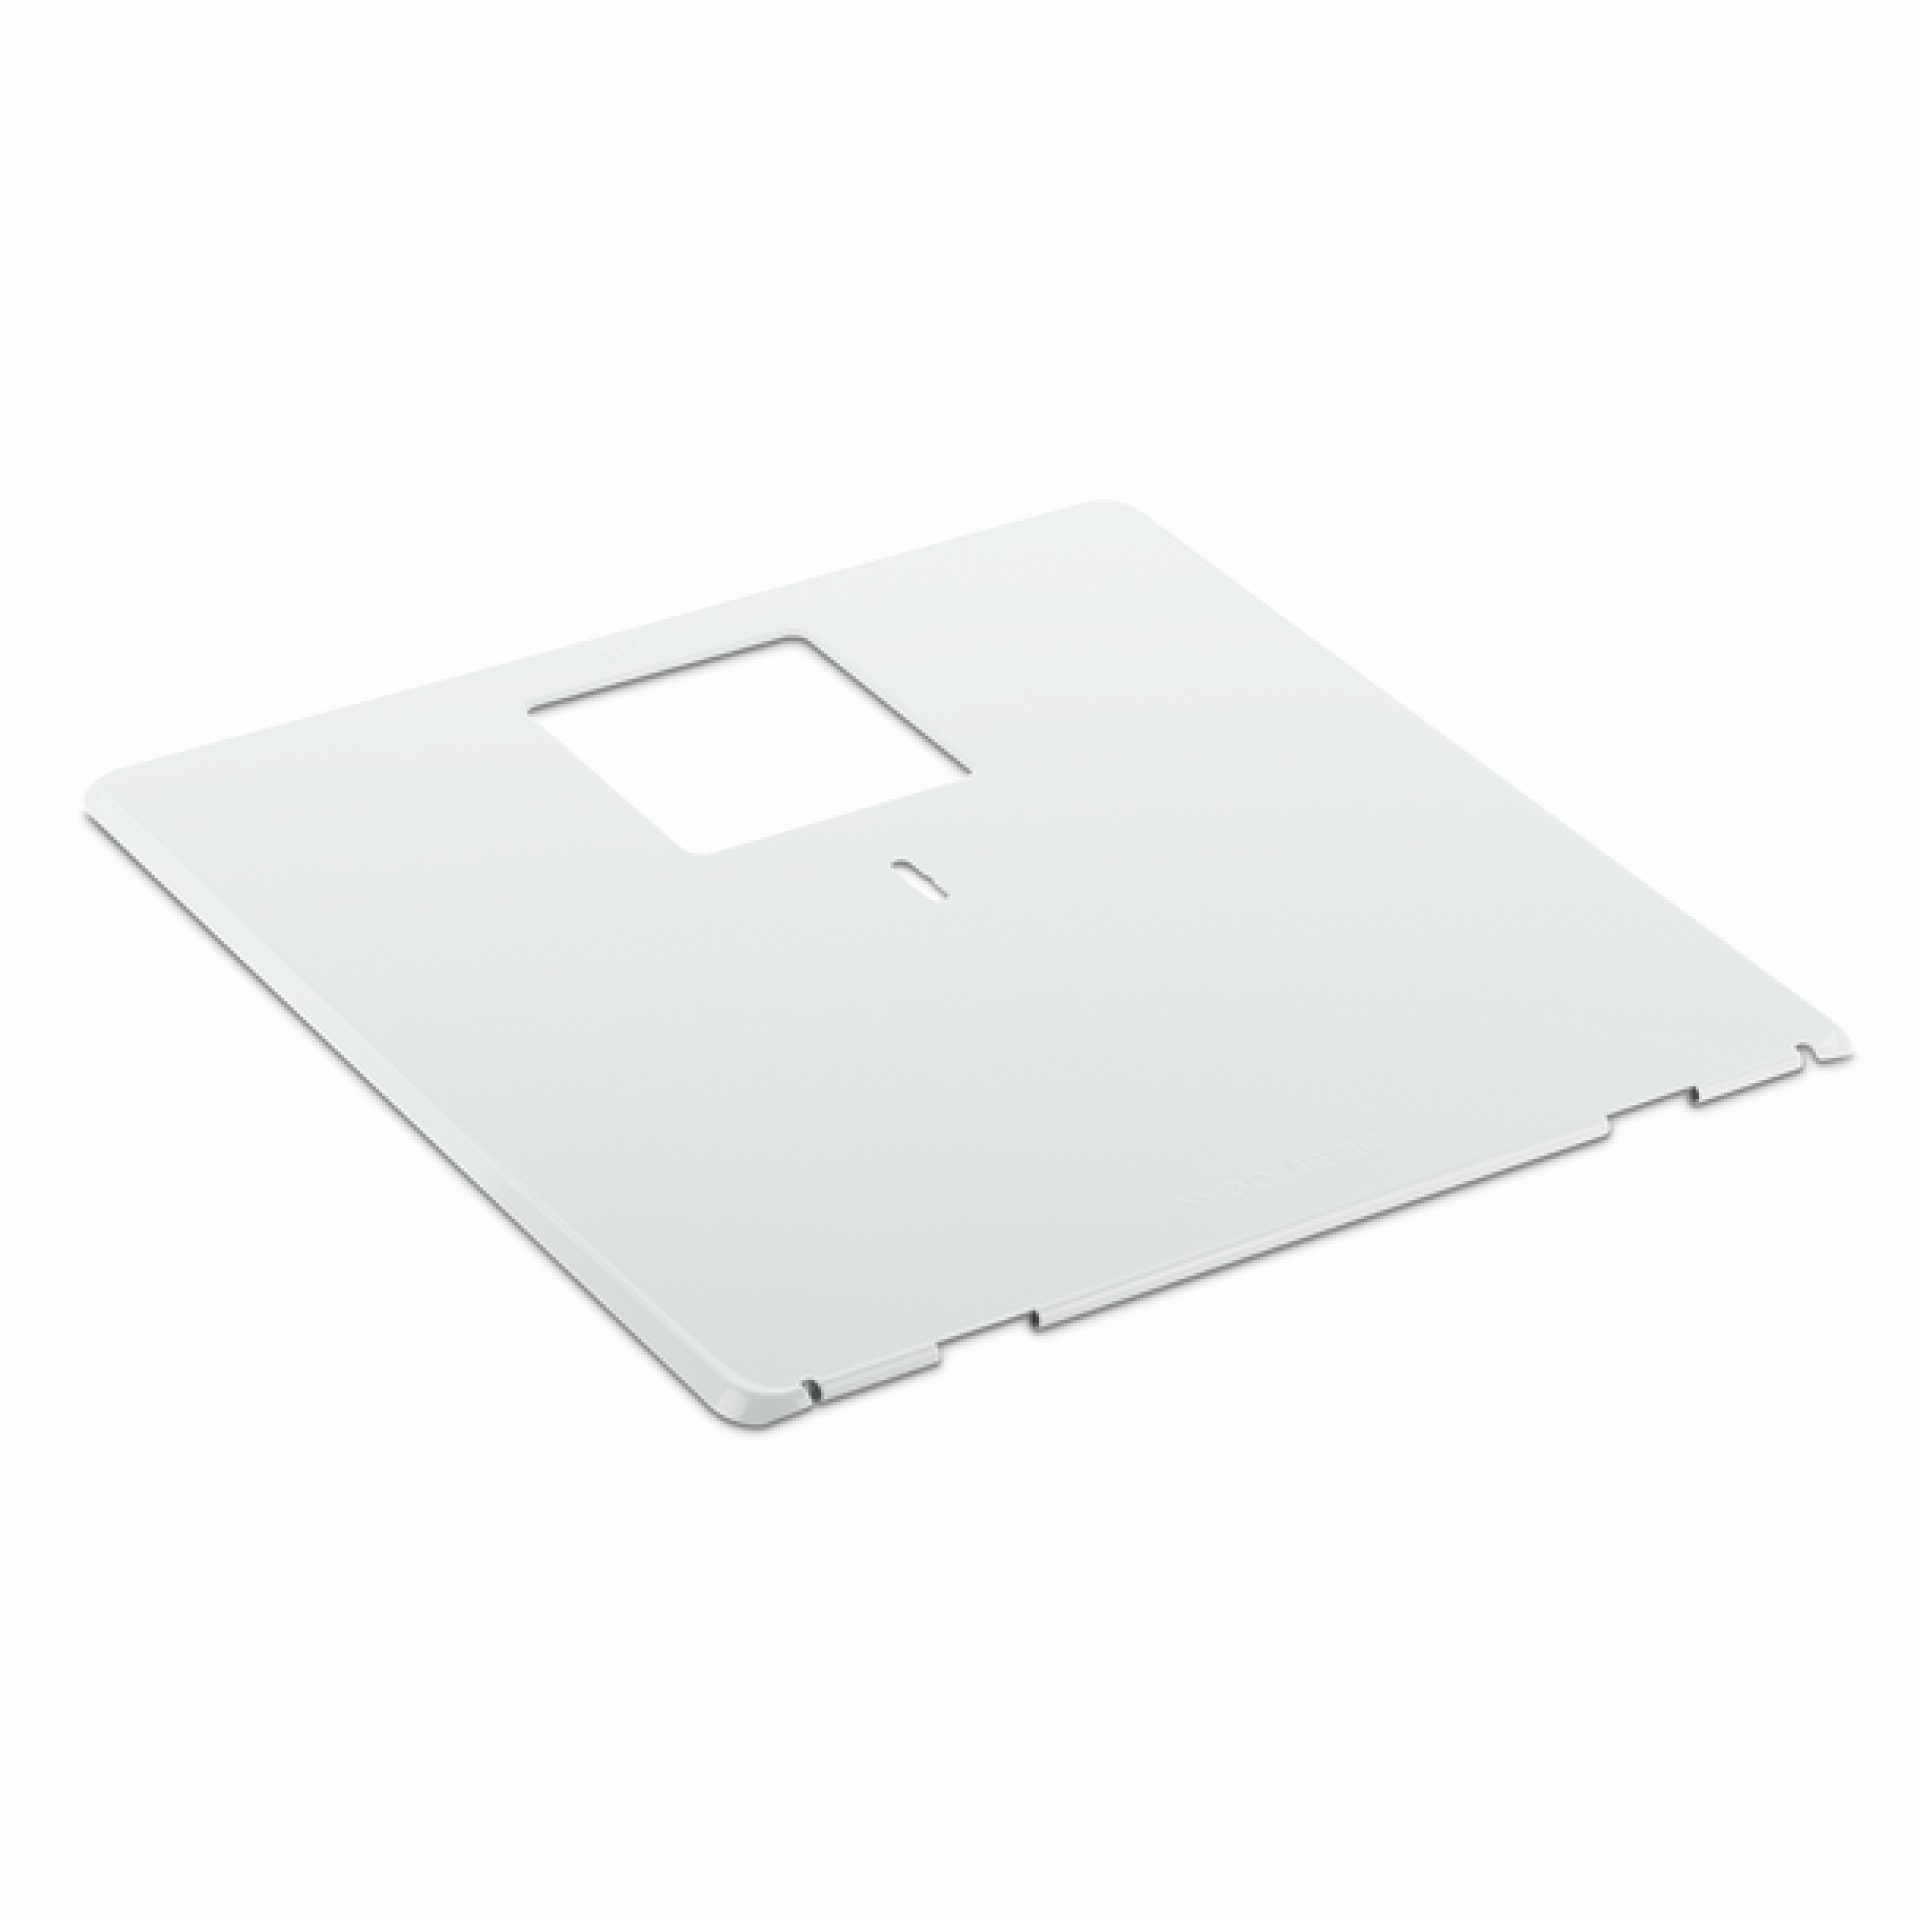 ATWOOD MOBILE PRODUCTS LLC | 94050 | REPLACEMENT DOOR FOR NEW DOMETIC 6 GALLON WATER HEATER ARCTIC WHITE